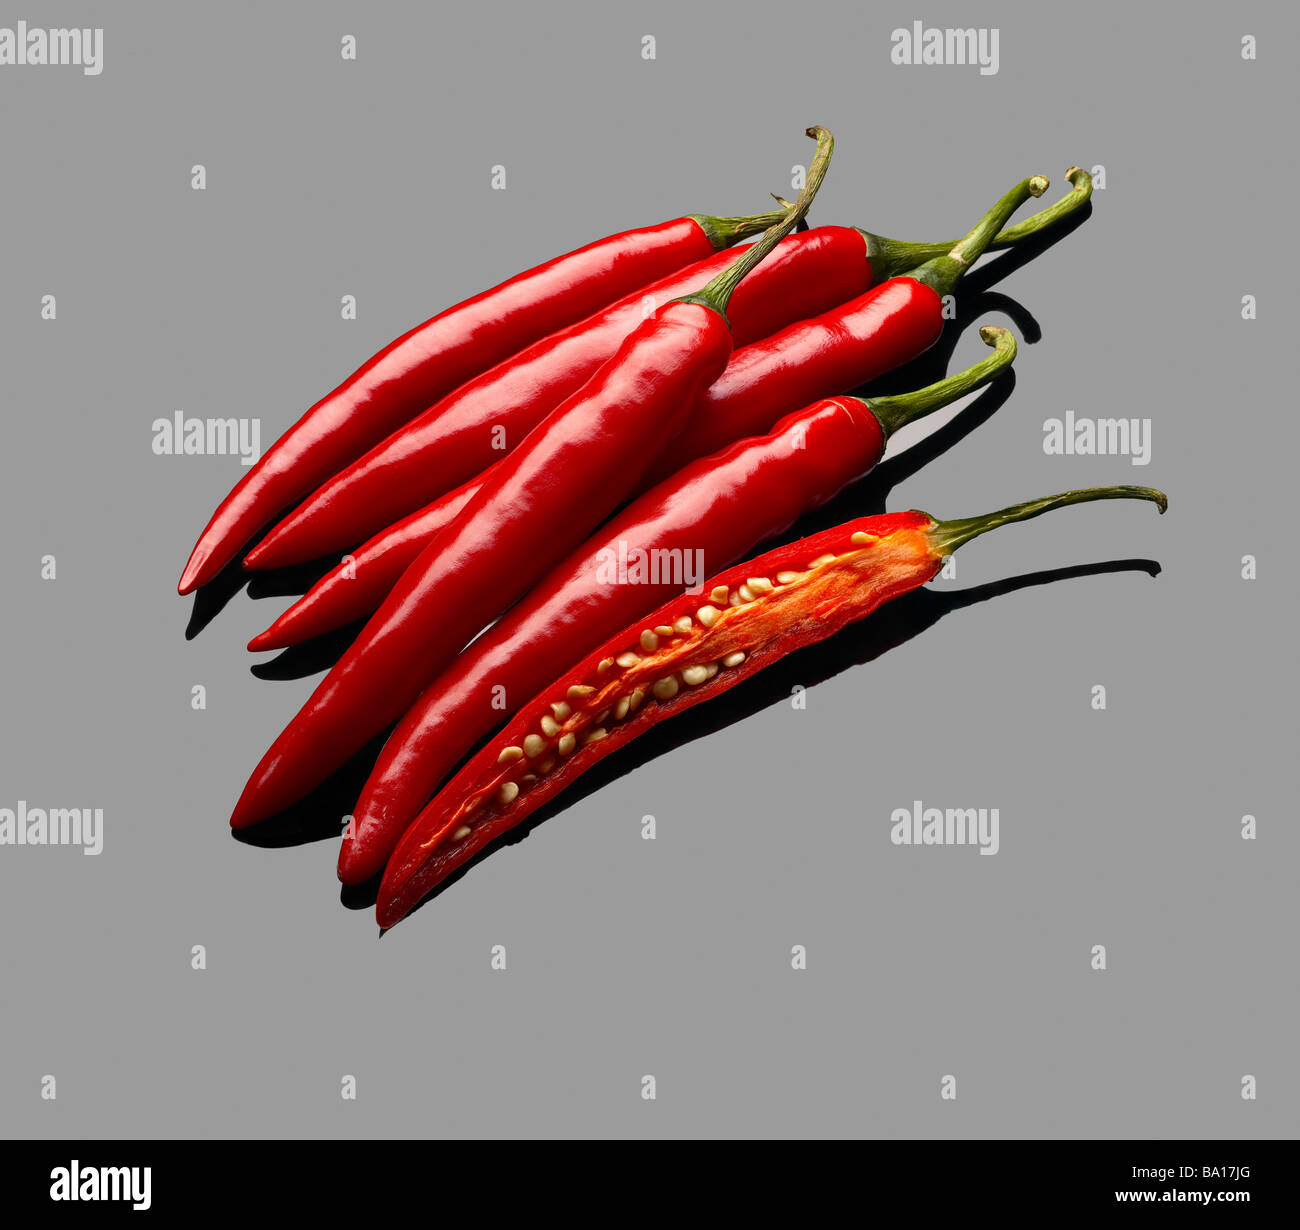 fresh red chili peppers over grey reflective surface Stock Photo